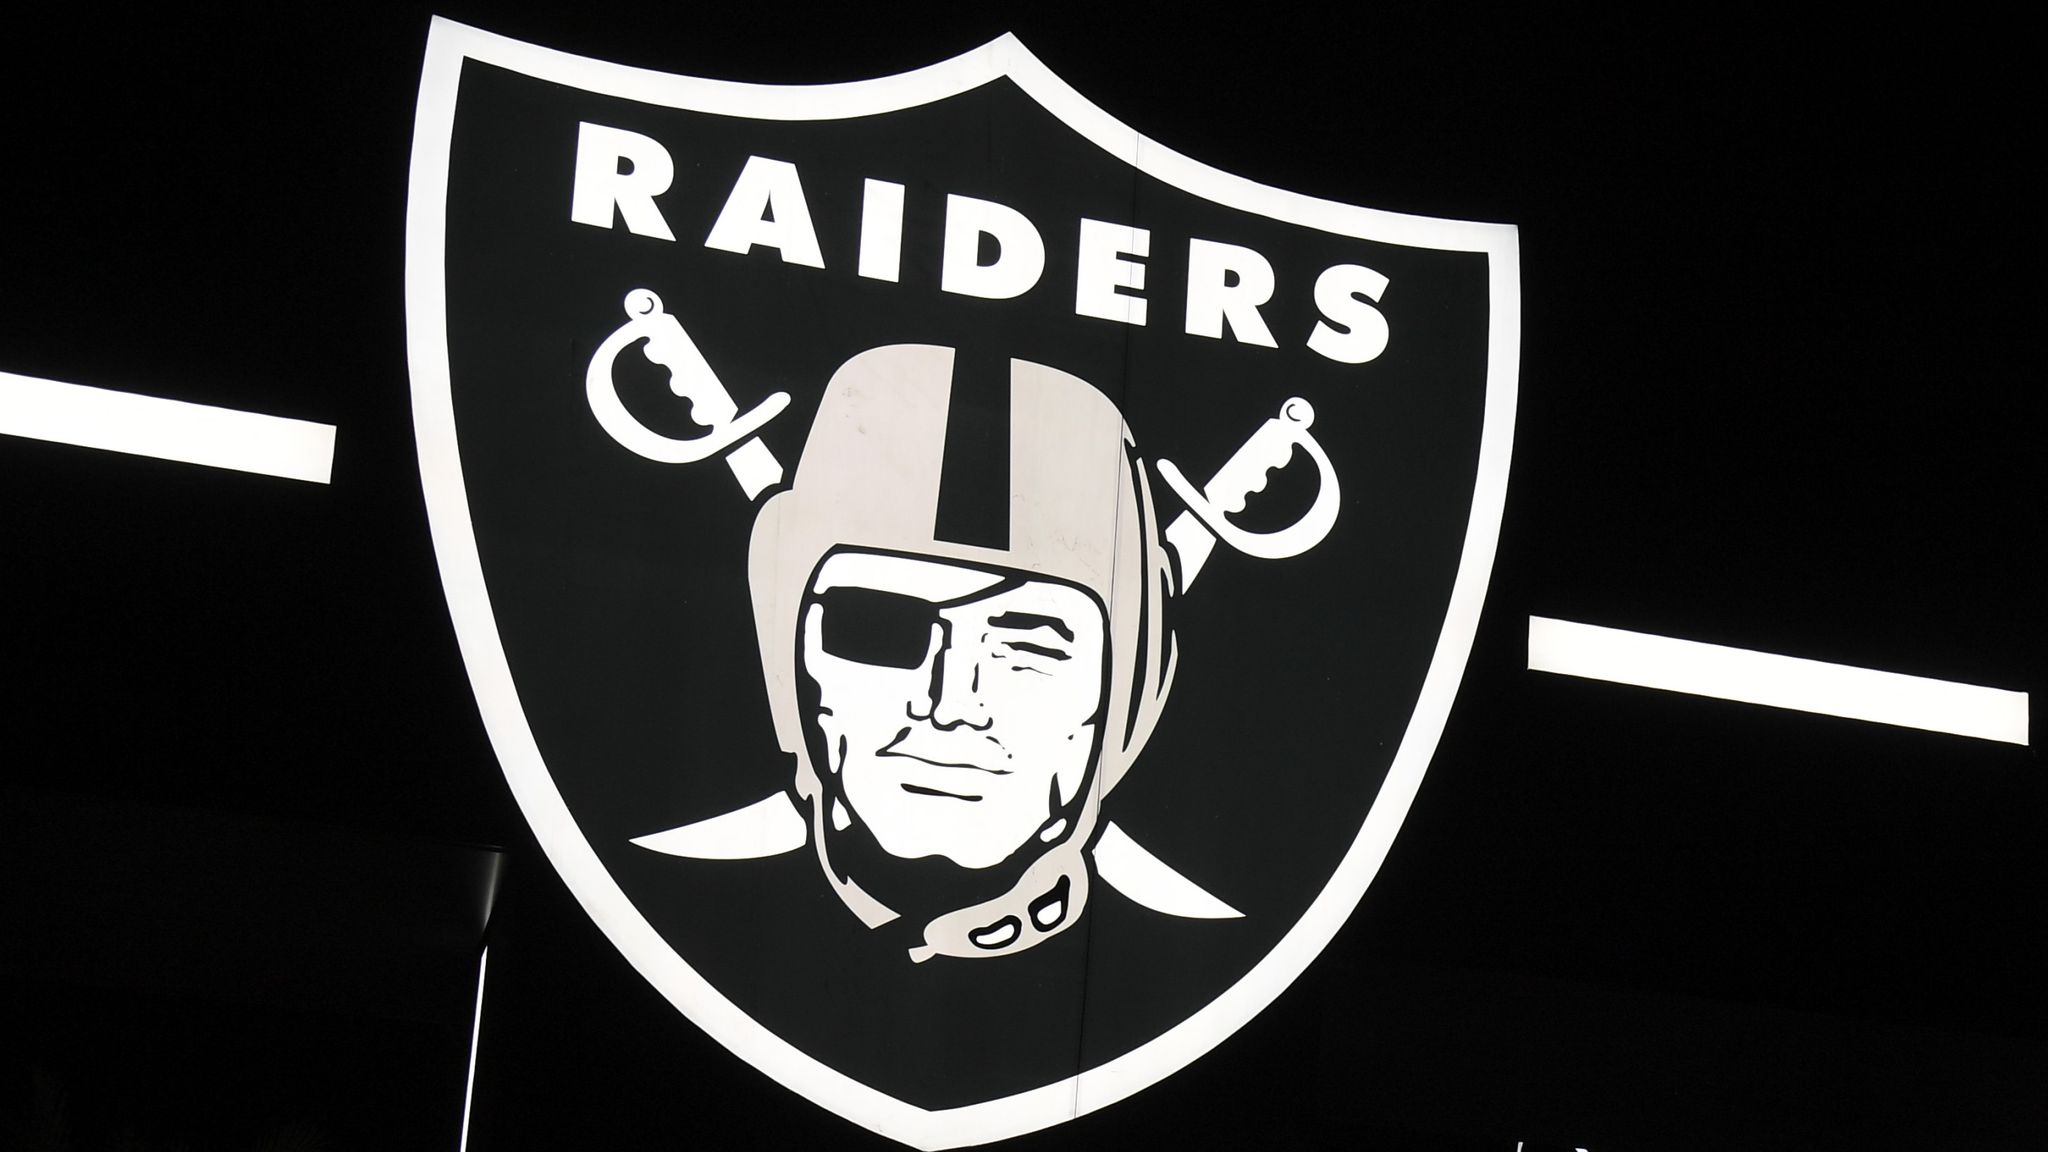 Las Vegas Raiders go into Sunday's game without 3 starters